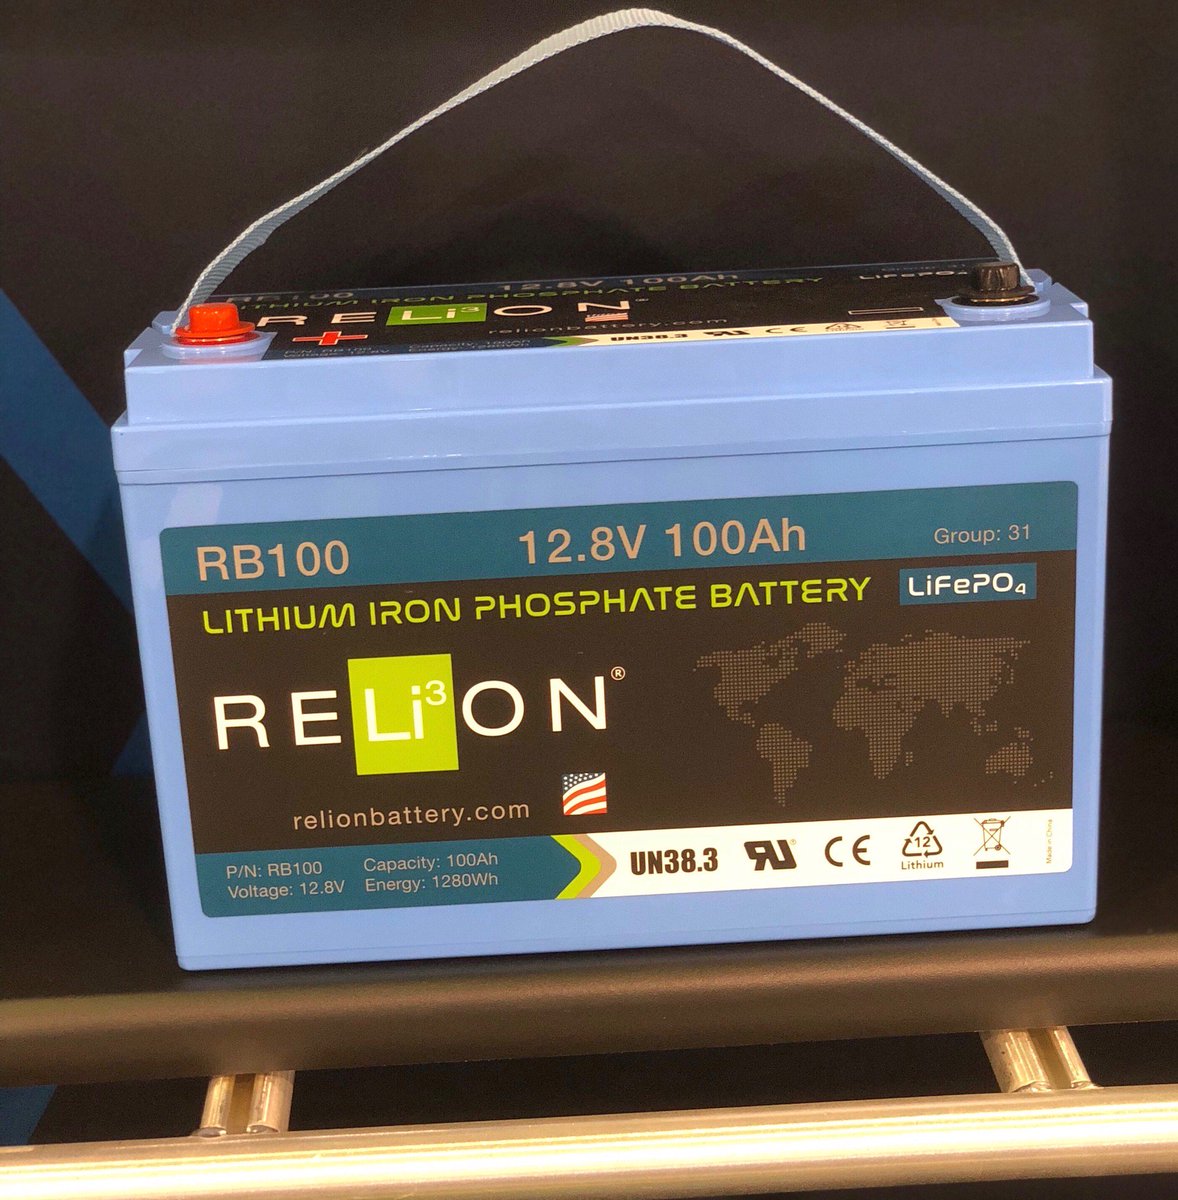 For those @SPIConvention right now, we're giving away one of our most popular products - the RB100 a 12V 100 Ah LiFePO4 battery. Stop by booth #474 today and enter to win. The lucky winner will be announced at 4 pm PST. #spicon #solarpowerinternational #solarconvention #ESIcon